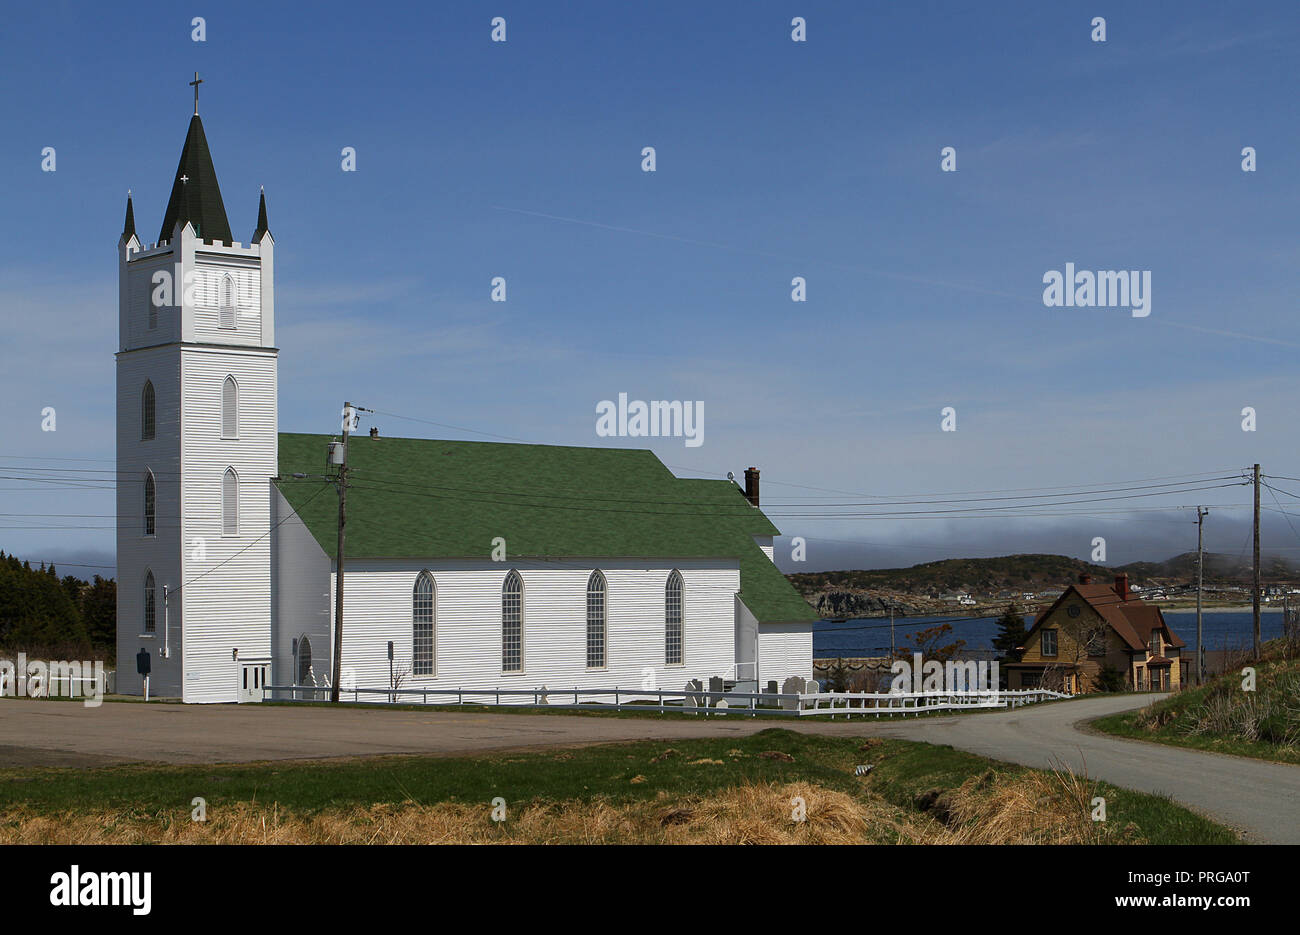 Town of Trinity. Trinity is a small town located on Trinity Bay in Newfoundland and Labrador, Canada.   One of the churches. Stock Photo